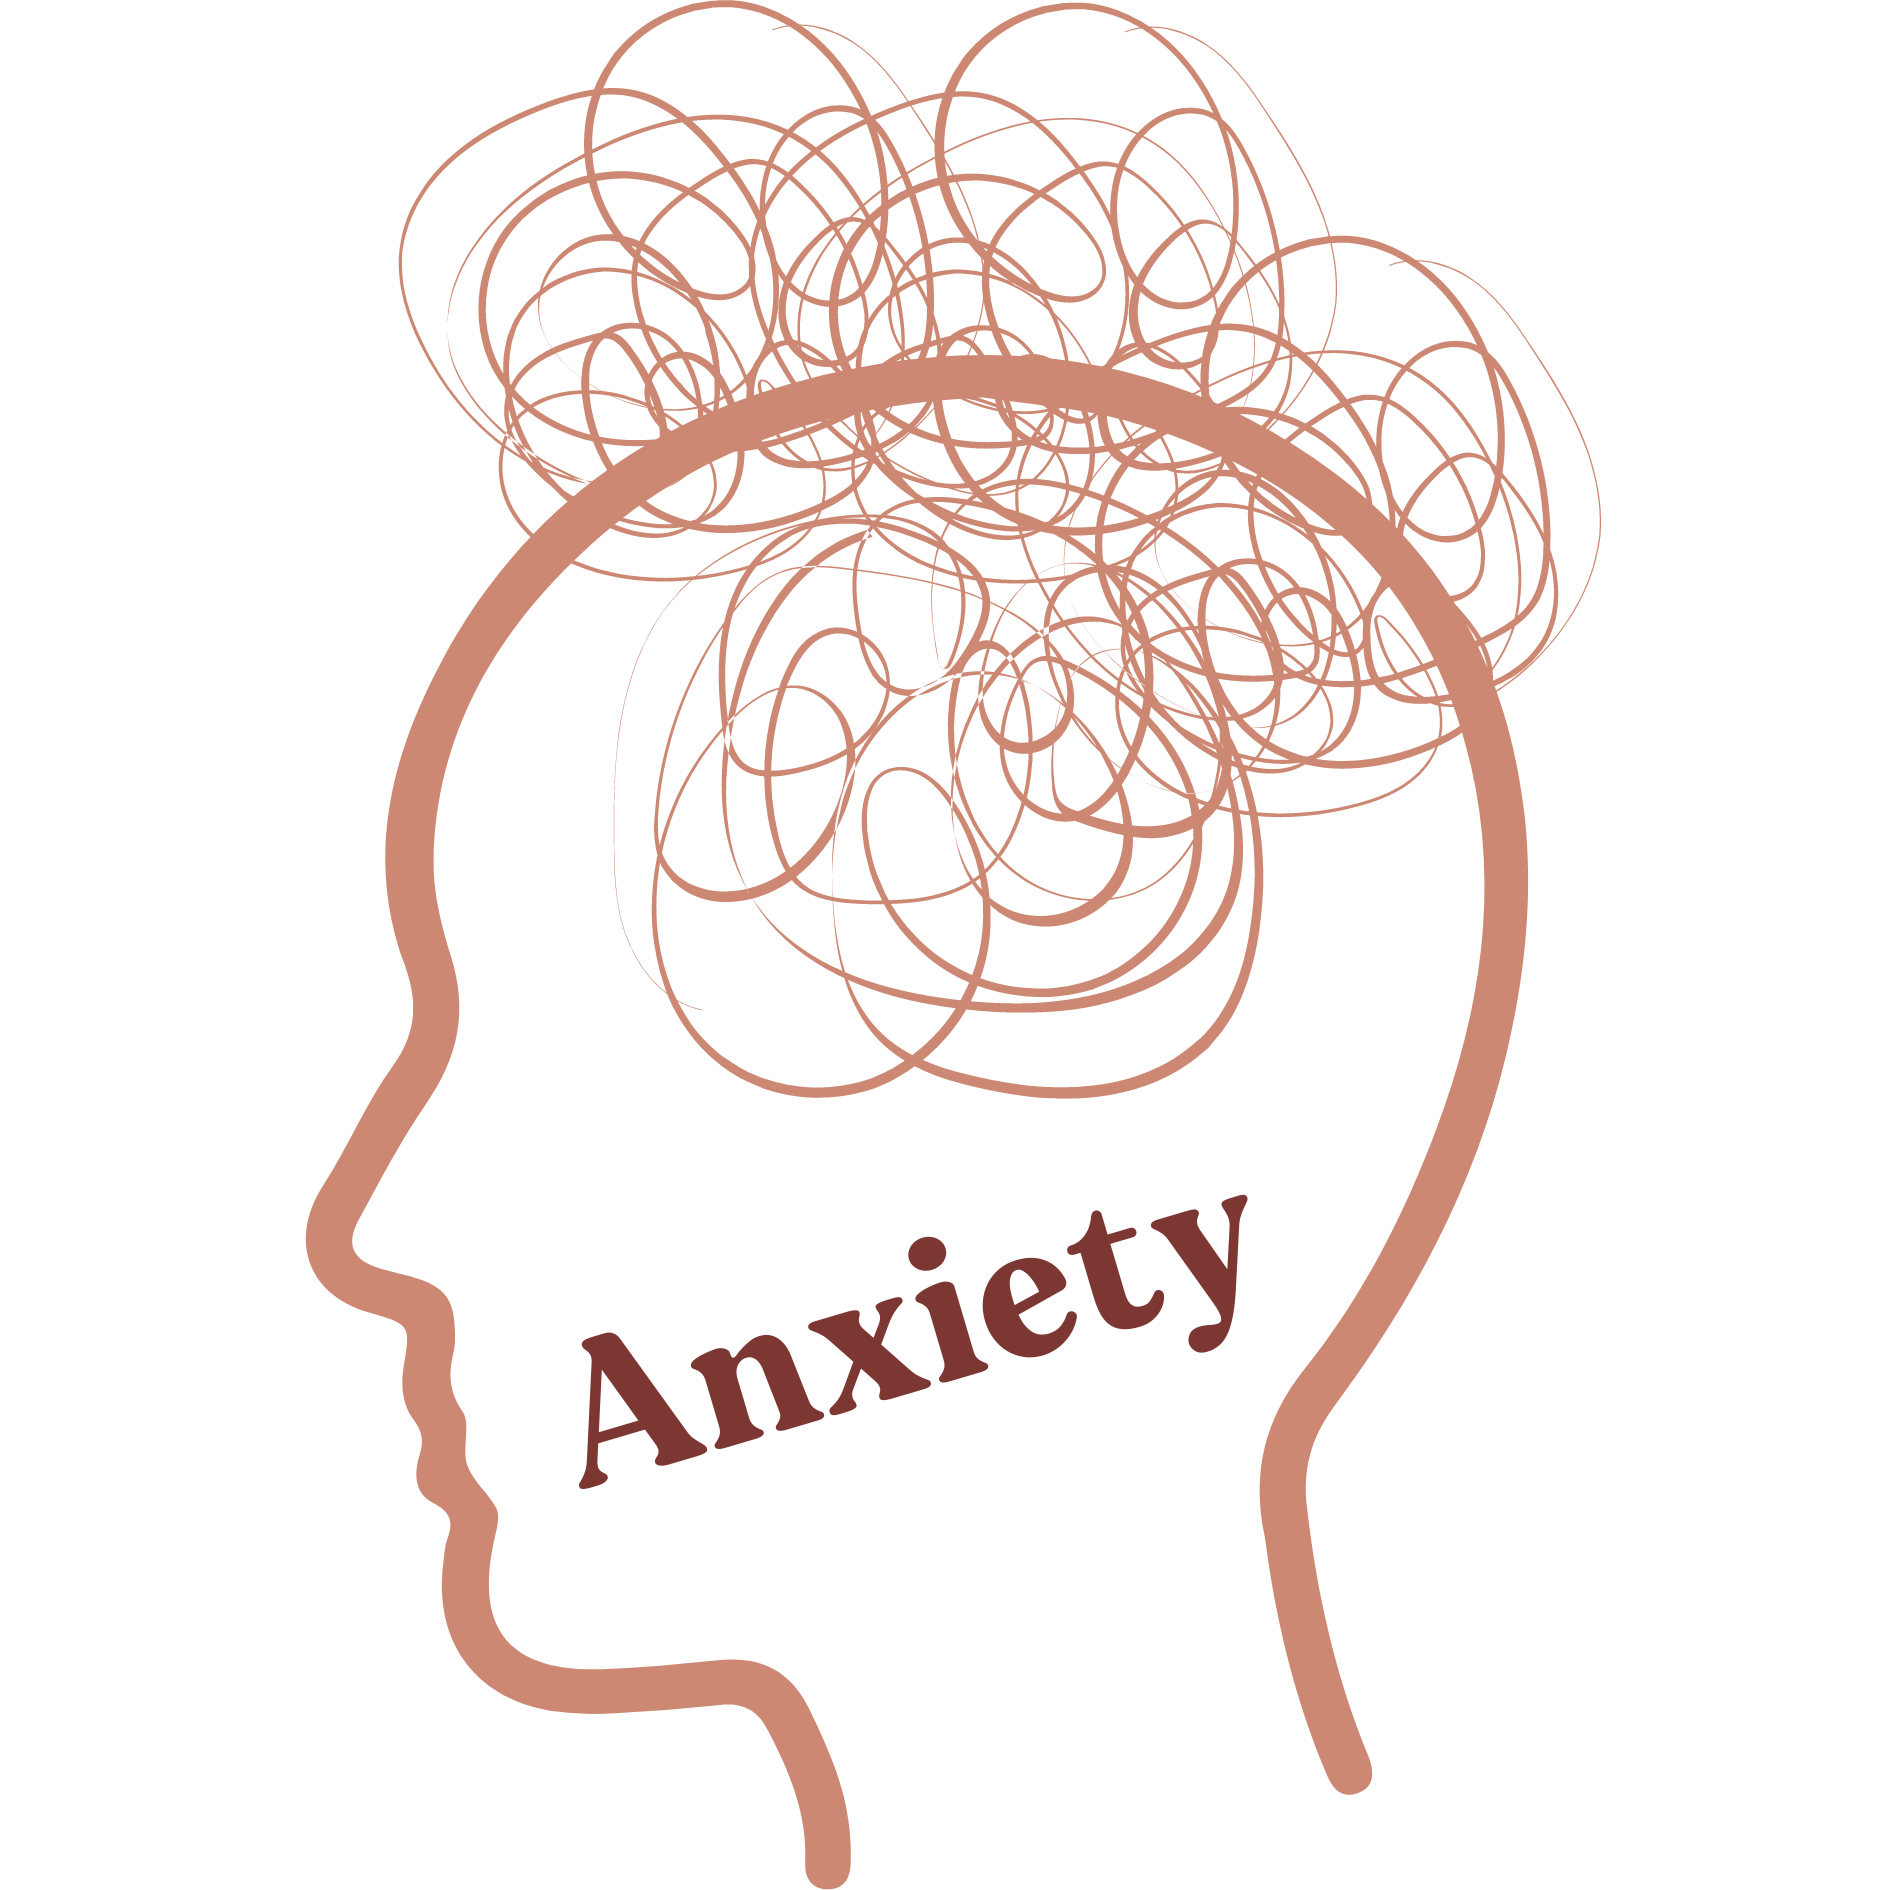 Muddled thoughts and over thinking in anxious brain